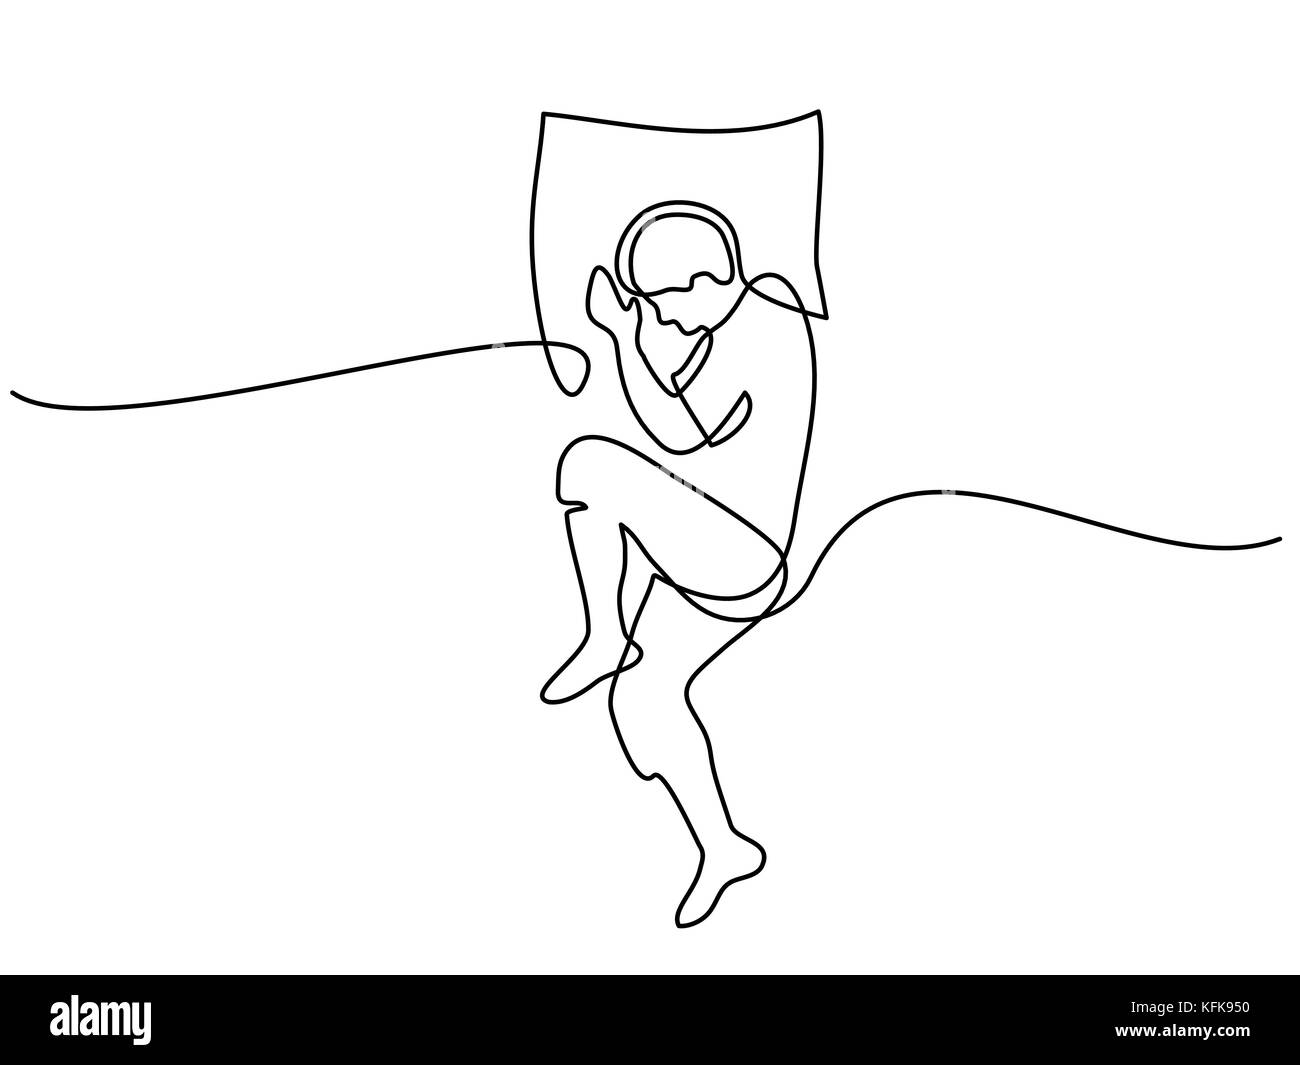 continuous line drawing man in sleeping pose on pillow vector illustration KFK950